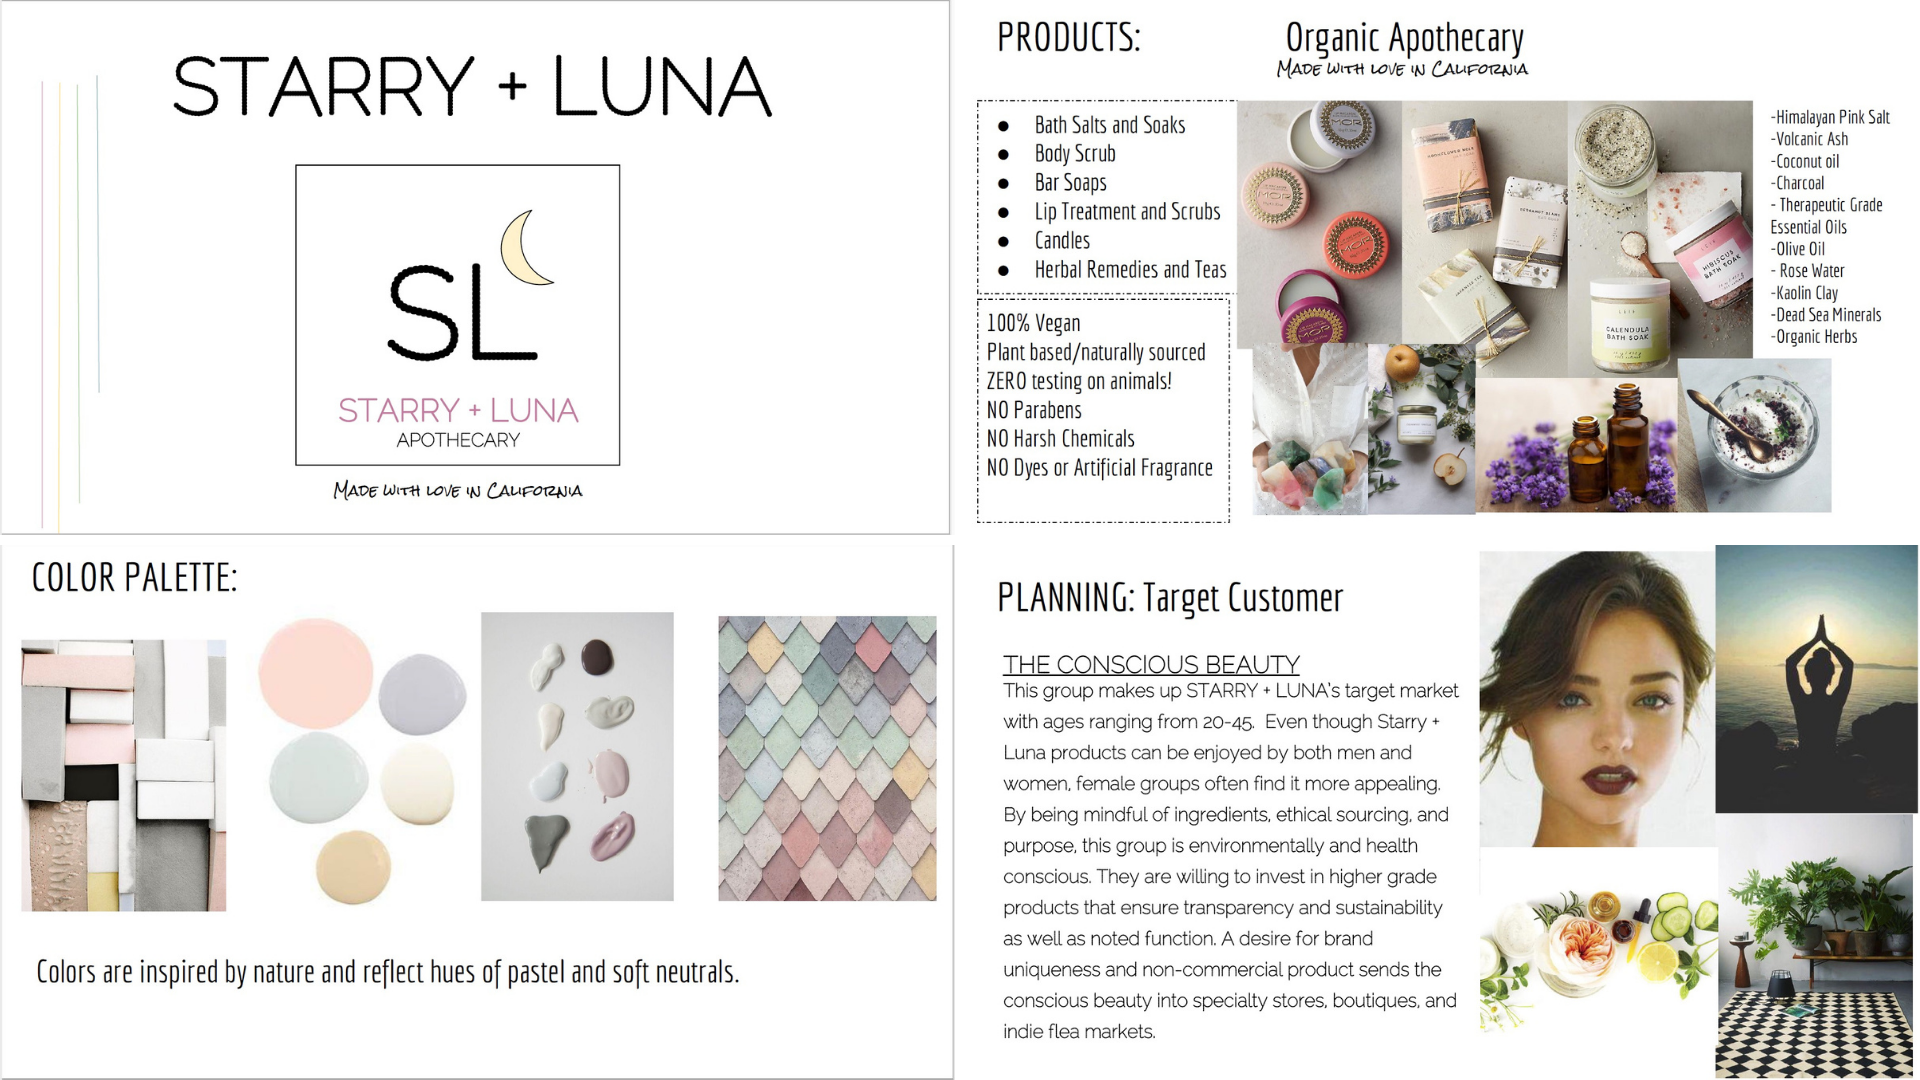 Screenshots of Starry + Luna products